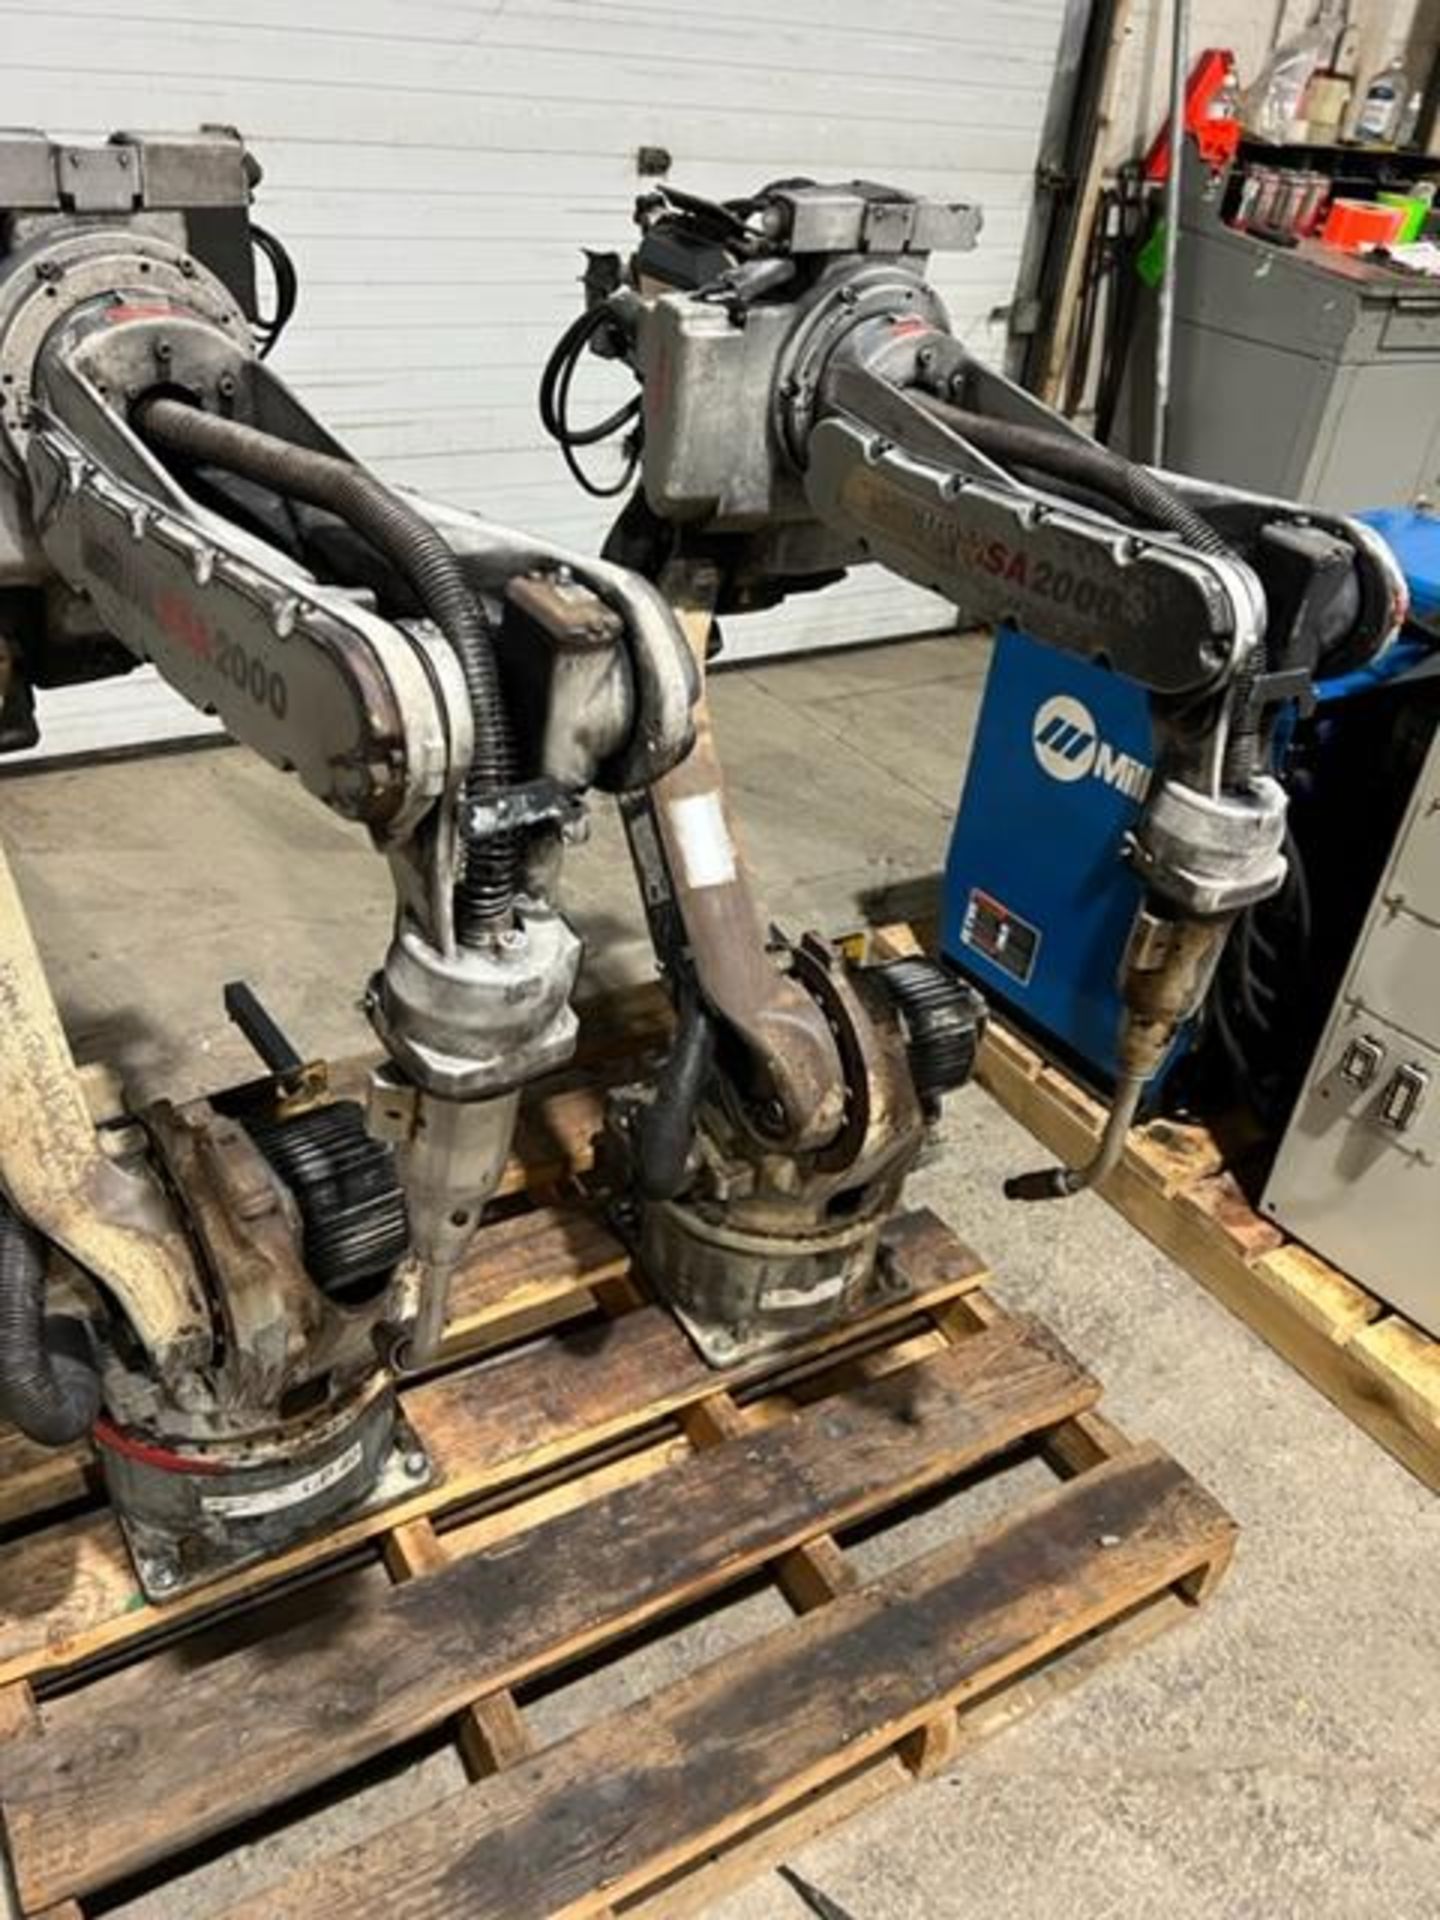 Set of 2 (2 units) 2007 Motoman SSA 2000 Welding Robots Complete with Auto Axcess 450 Welding - Image 3 of 6